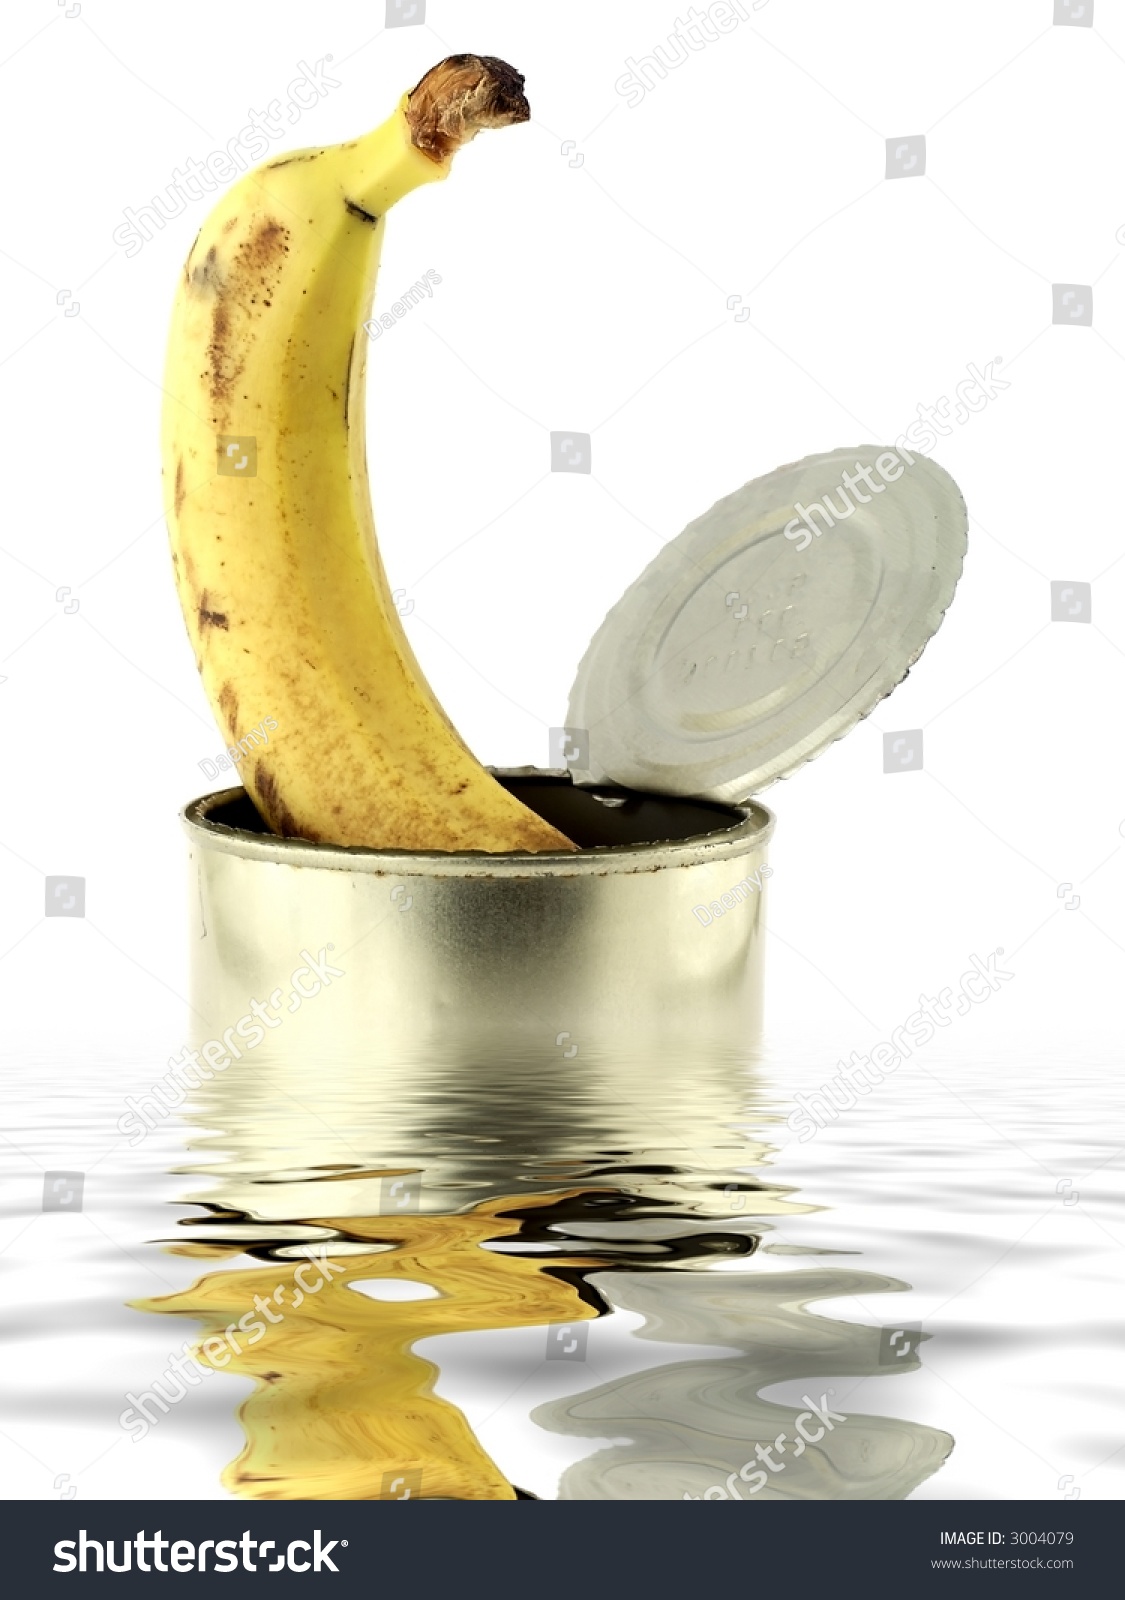 Banana Floating In A Can Stock Photo 3004079 : Shutterstock